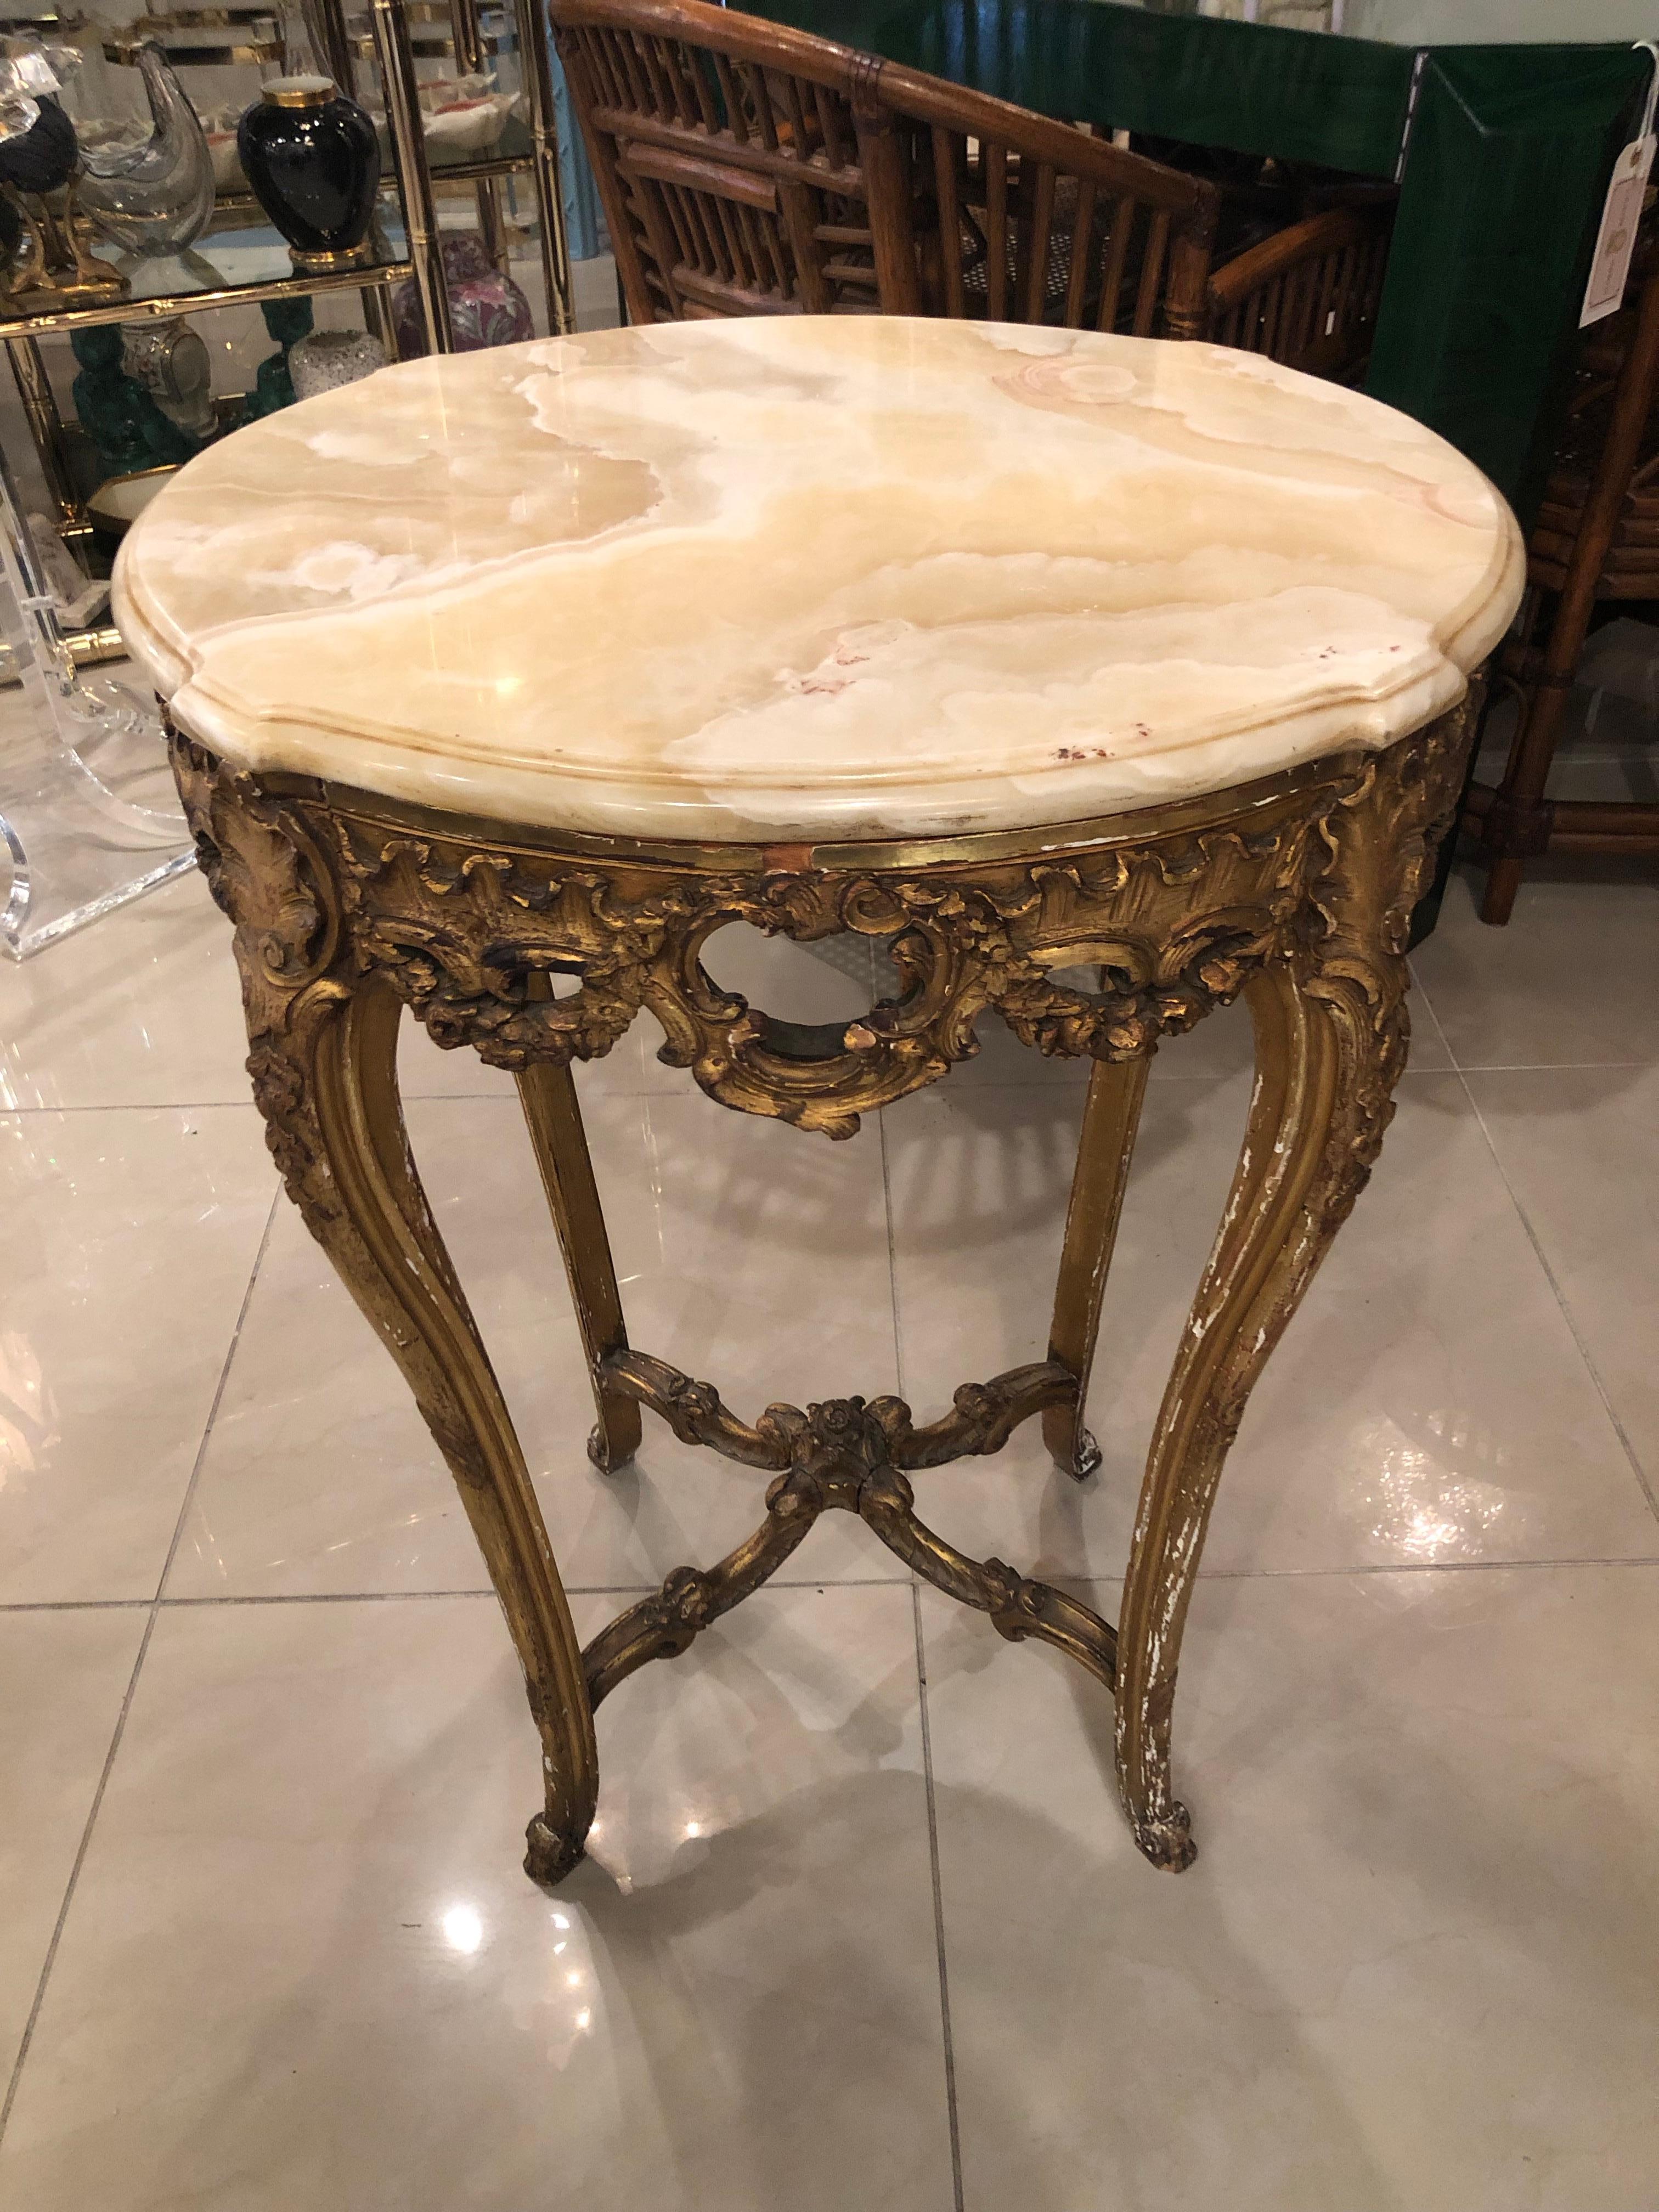 Lovely antique beverage, end, side ornate table with marble top. Copper tag on bottom says: Ameublements de style Meubles, Sieges, Tentures. A. Hugnet Fabricant, 69 Faubourg St, Antoine. Paris.